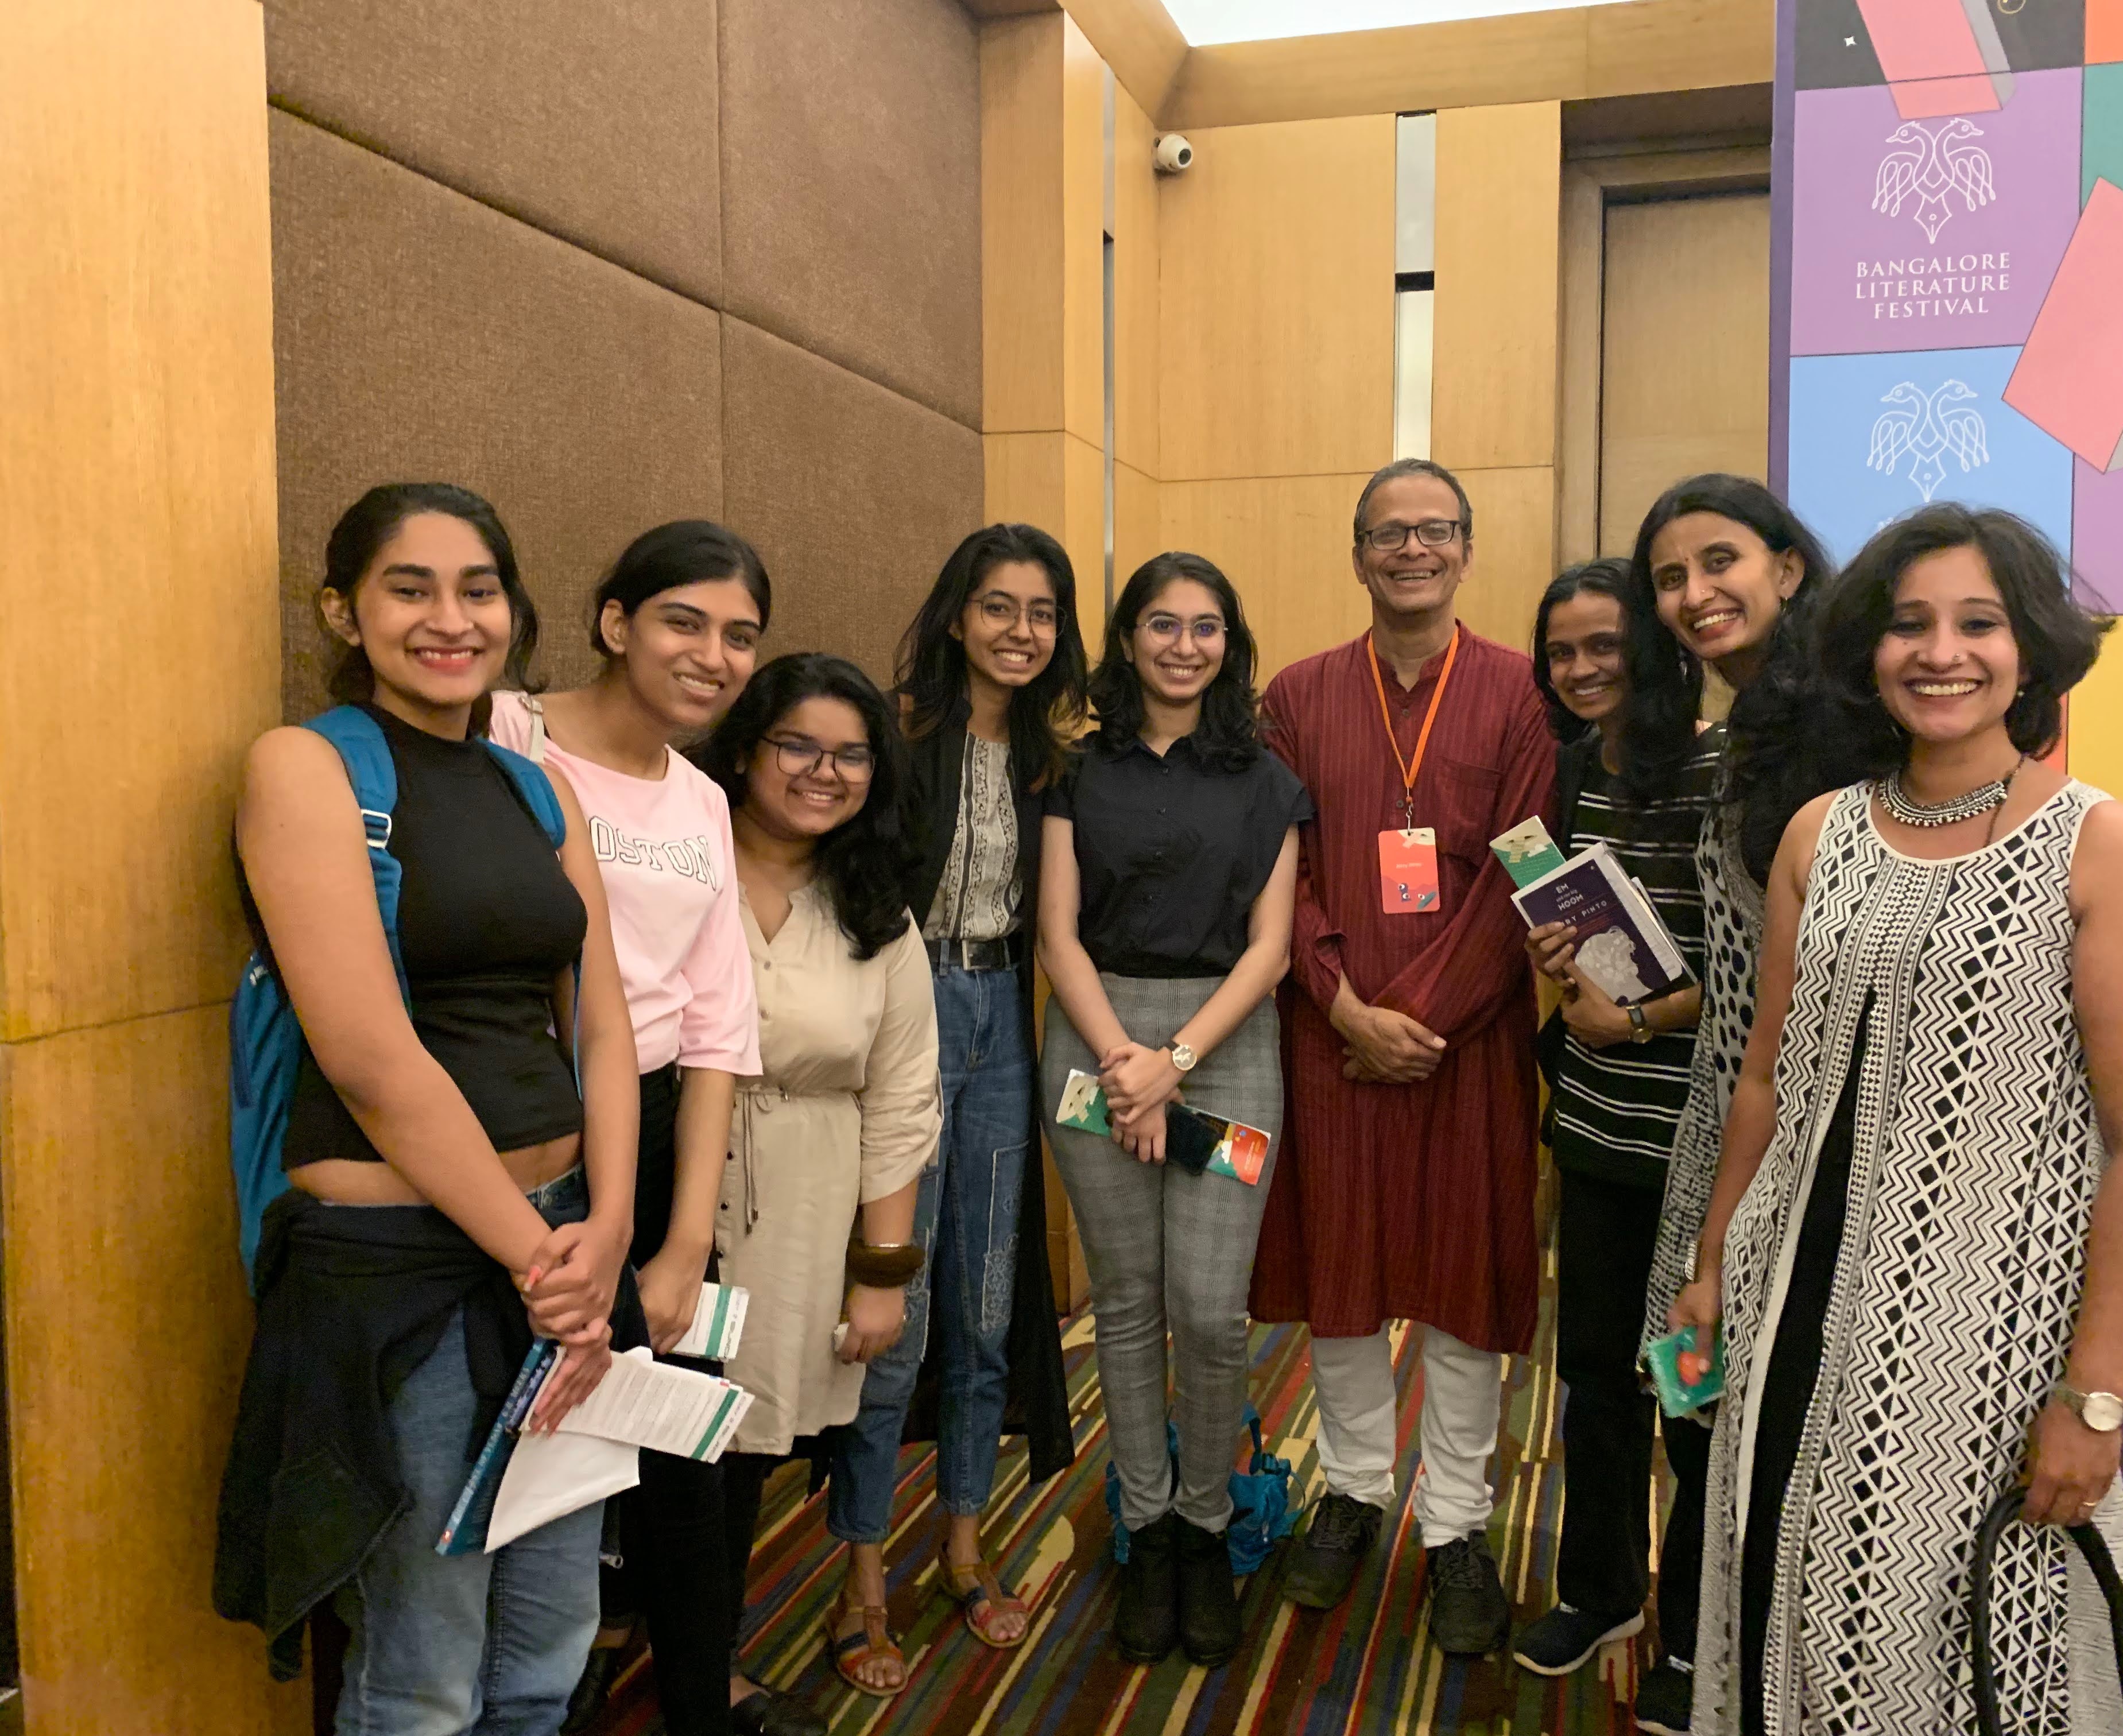 Trip to Bengaluru Lit Fest by English Literature Students